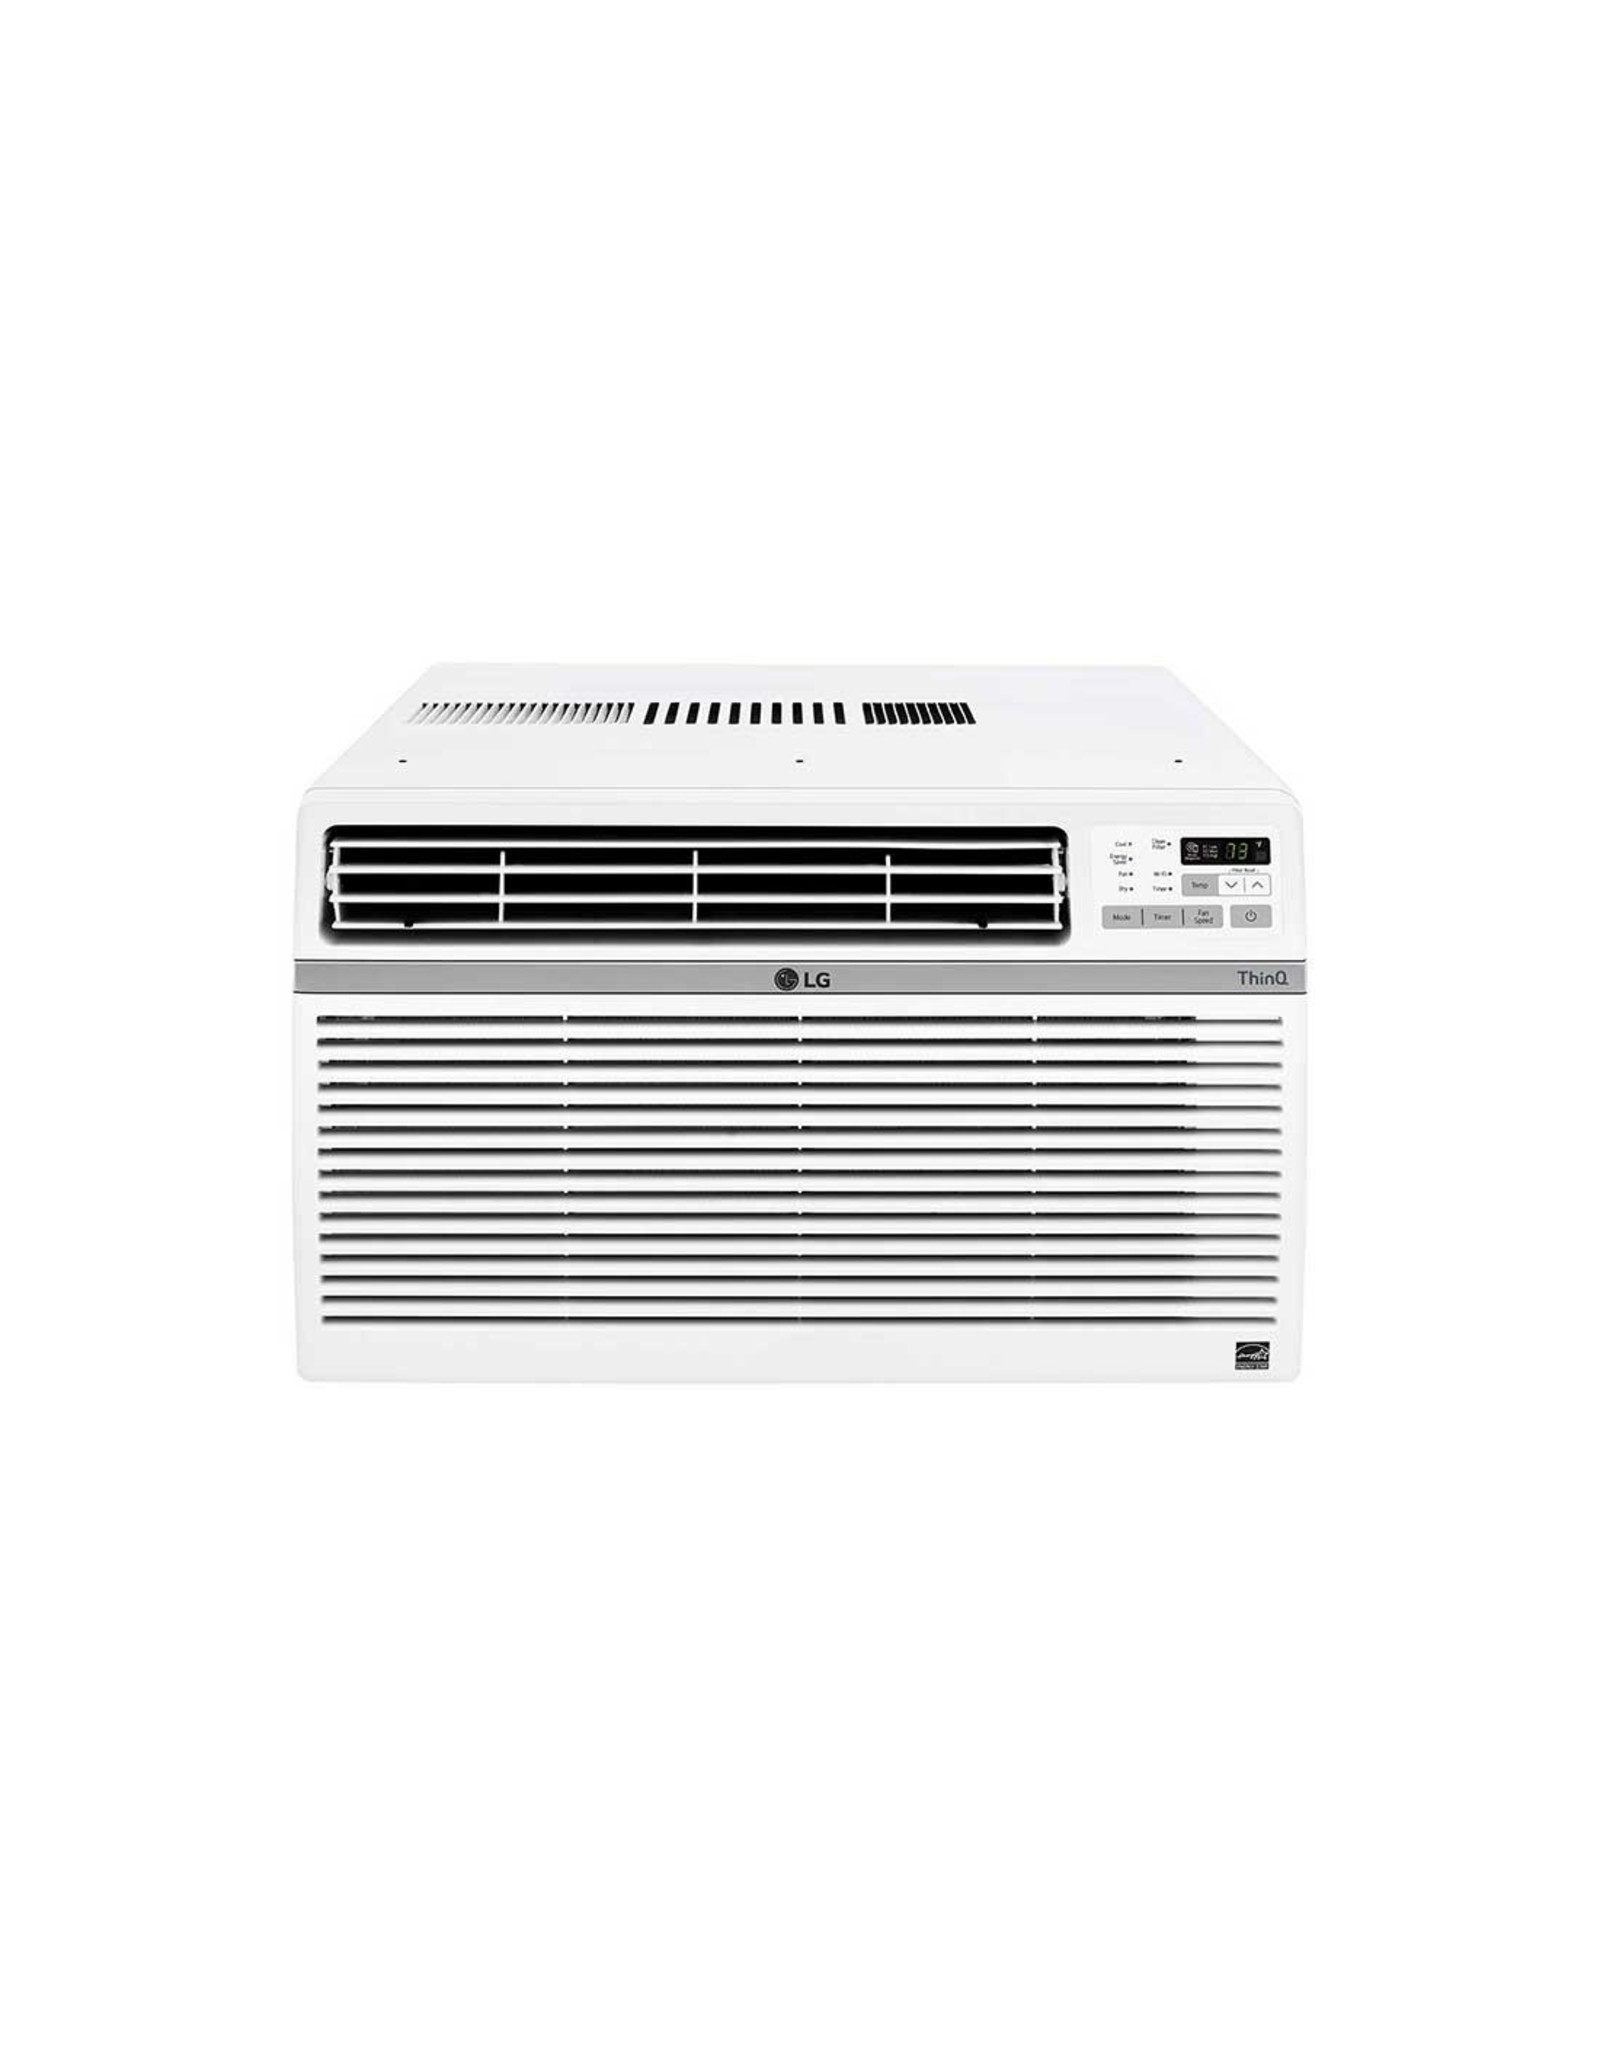 LG Electronics 12,000 BTU Window Smart (Wi-Fi) Air Conditioner with Remote, ENERGY STAR in White